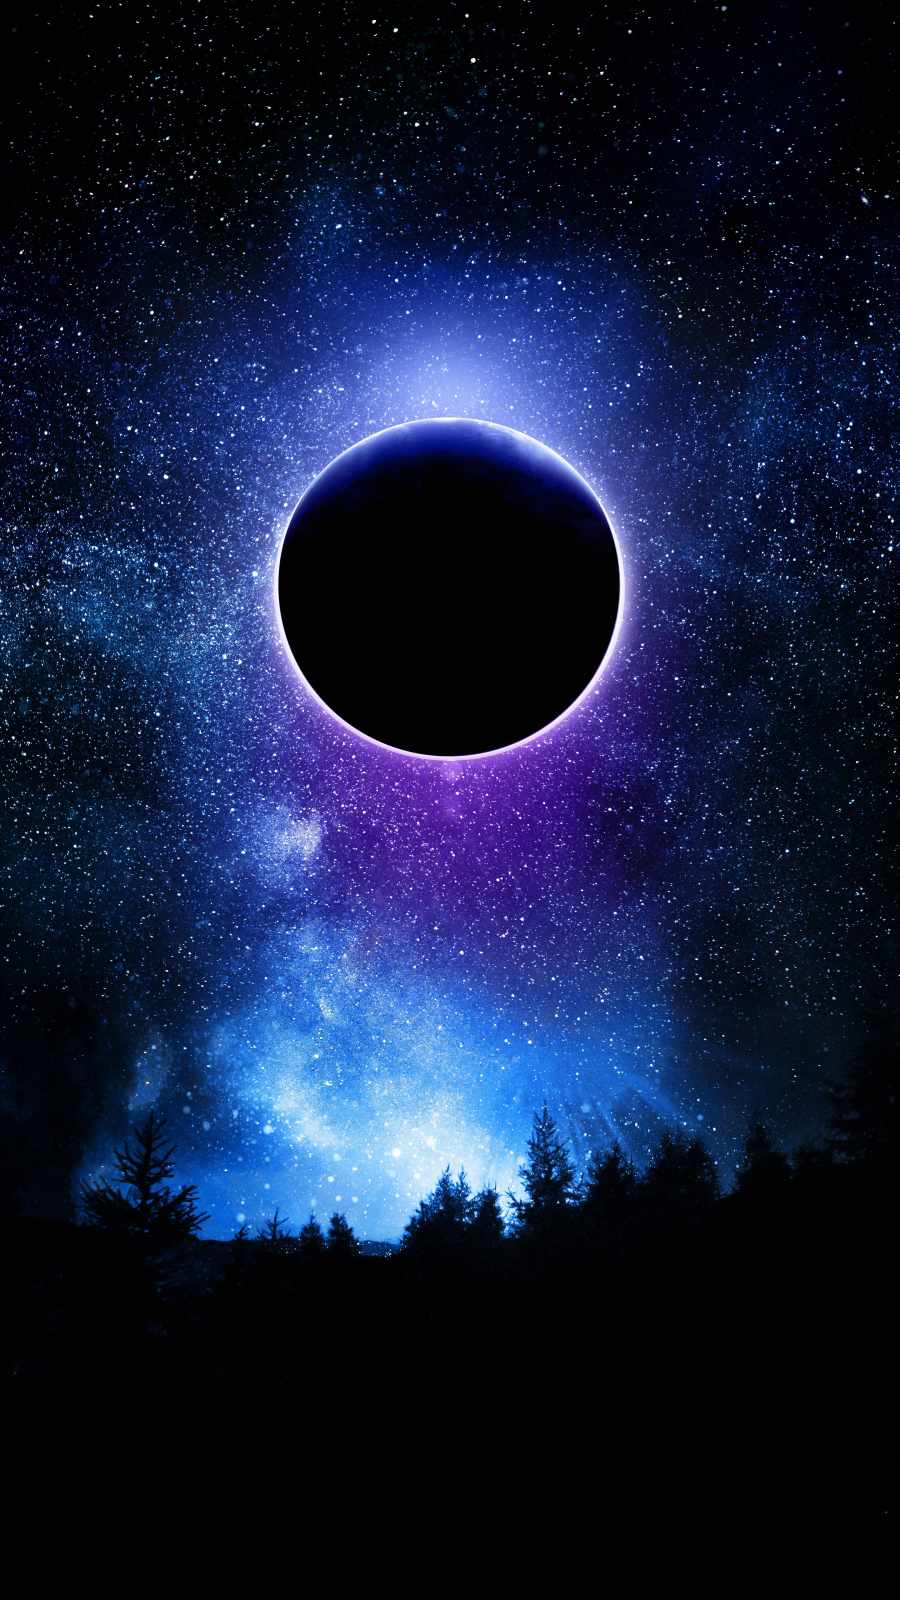 Eclipse in Space iPhone Wallpaper